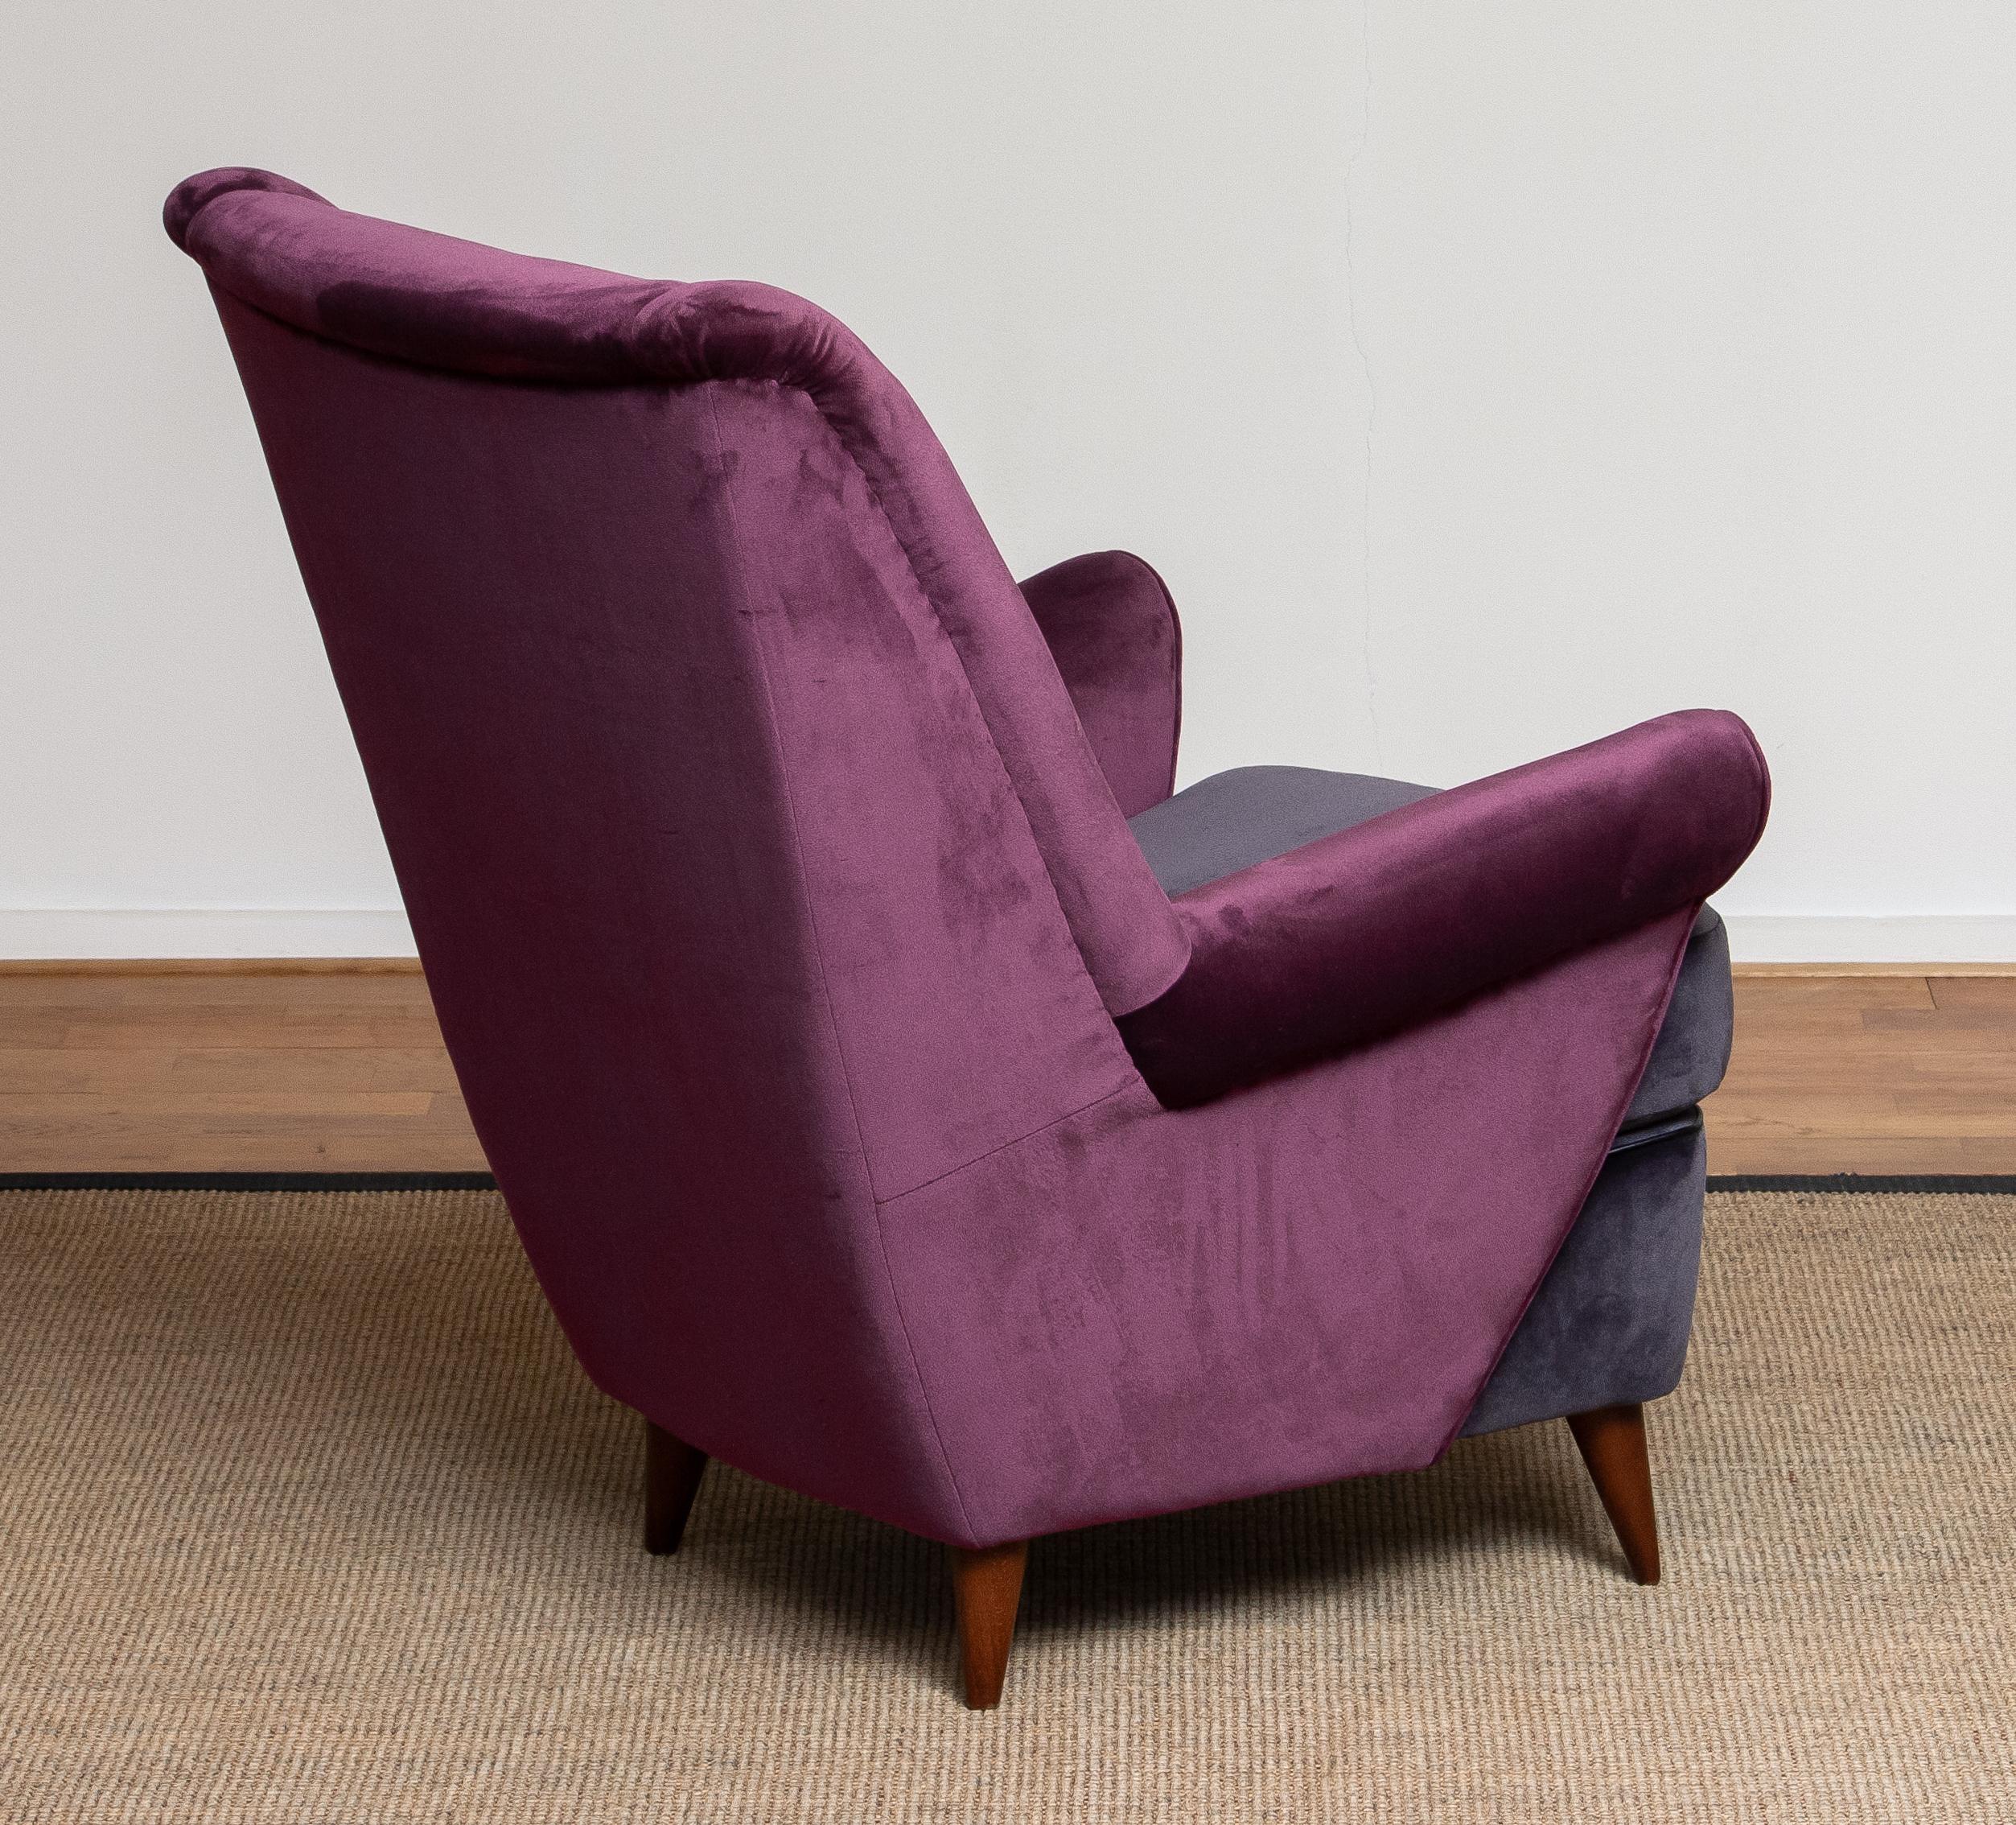 Mid-20th Century 50's Lounge / Easy Chair in Magenta by Designed Gio Ponti for ISA Bergamo, Italy